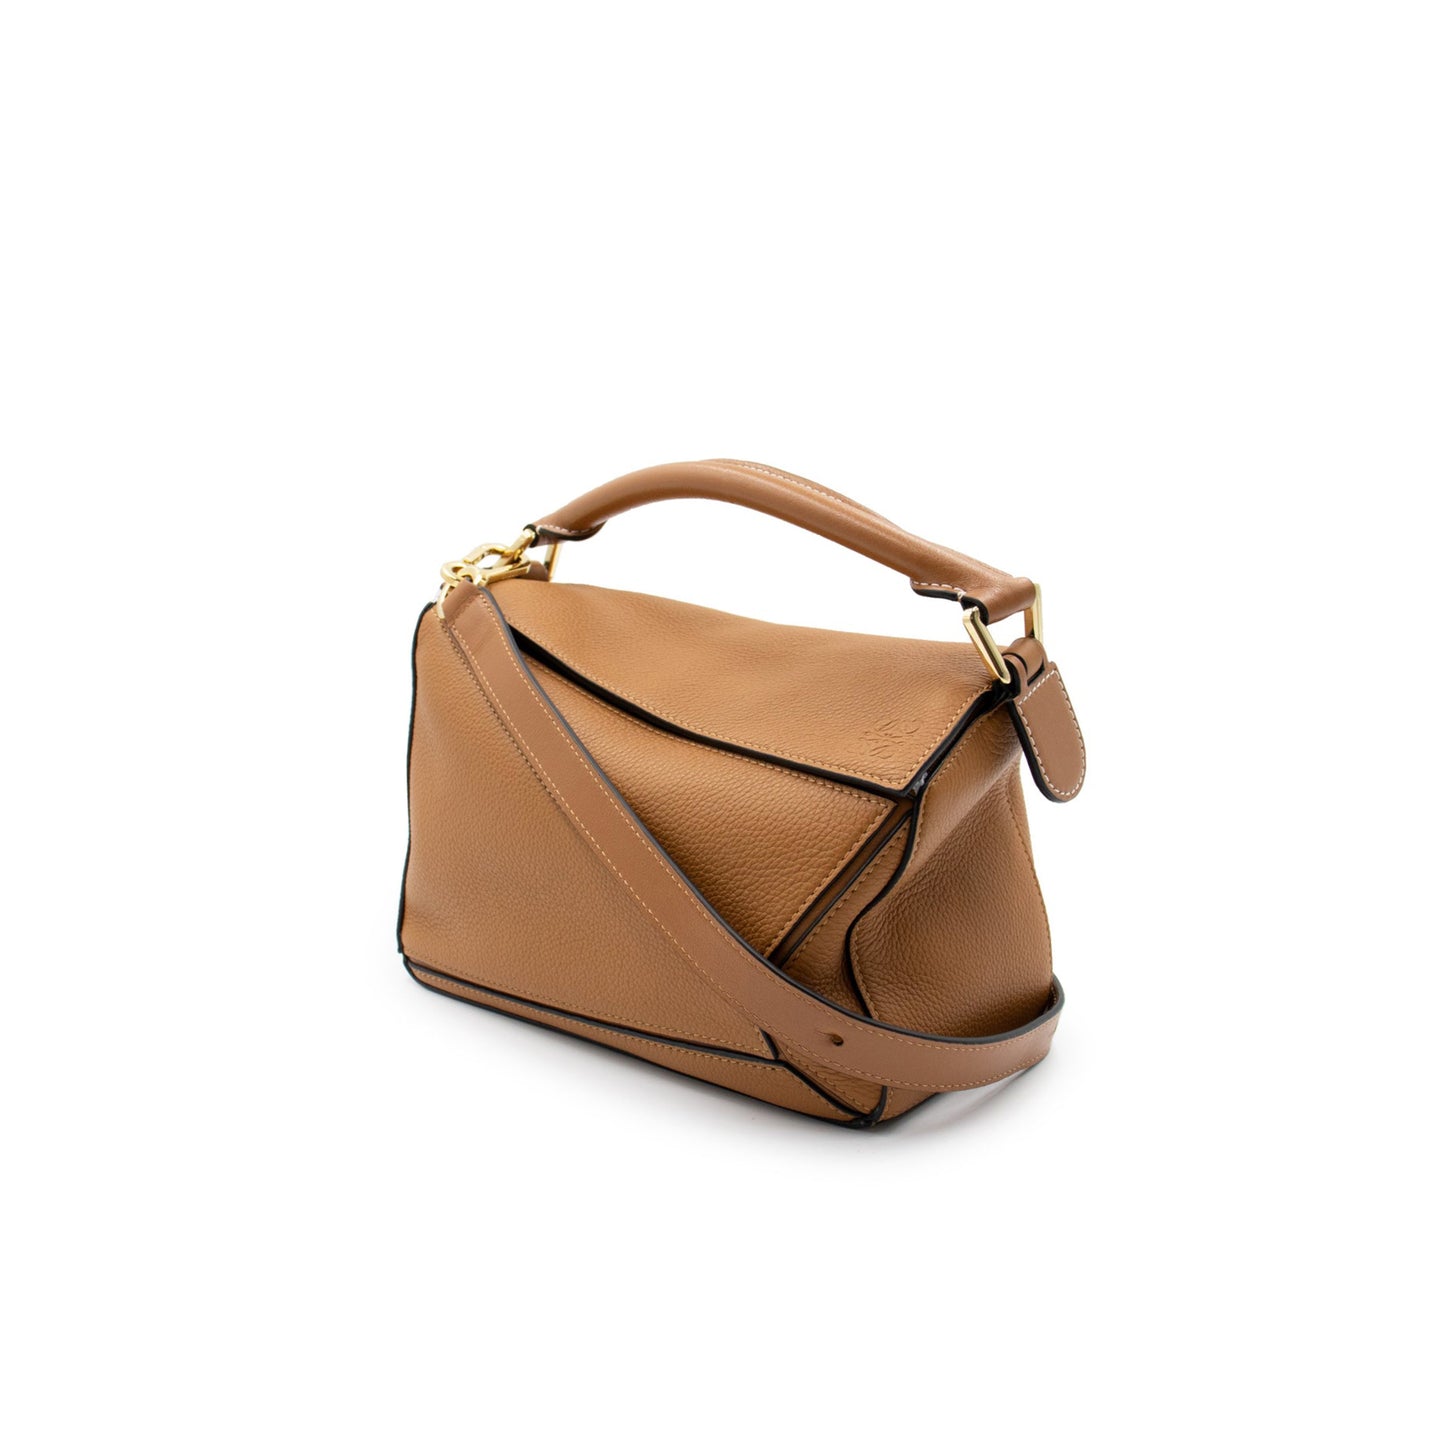 Small Puzzle Bag in Soft Grained Calfskin in Light Caramel